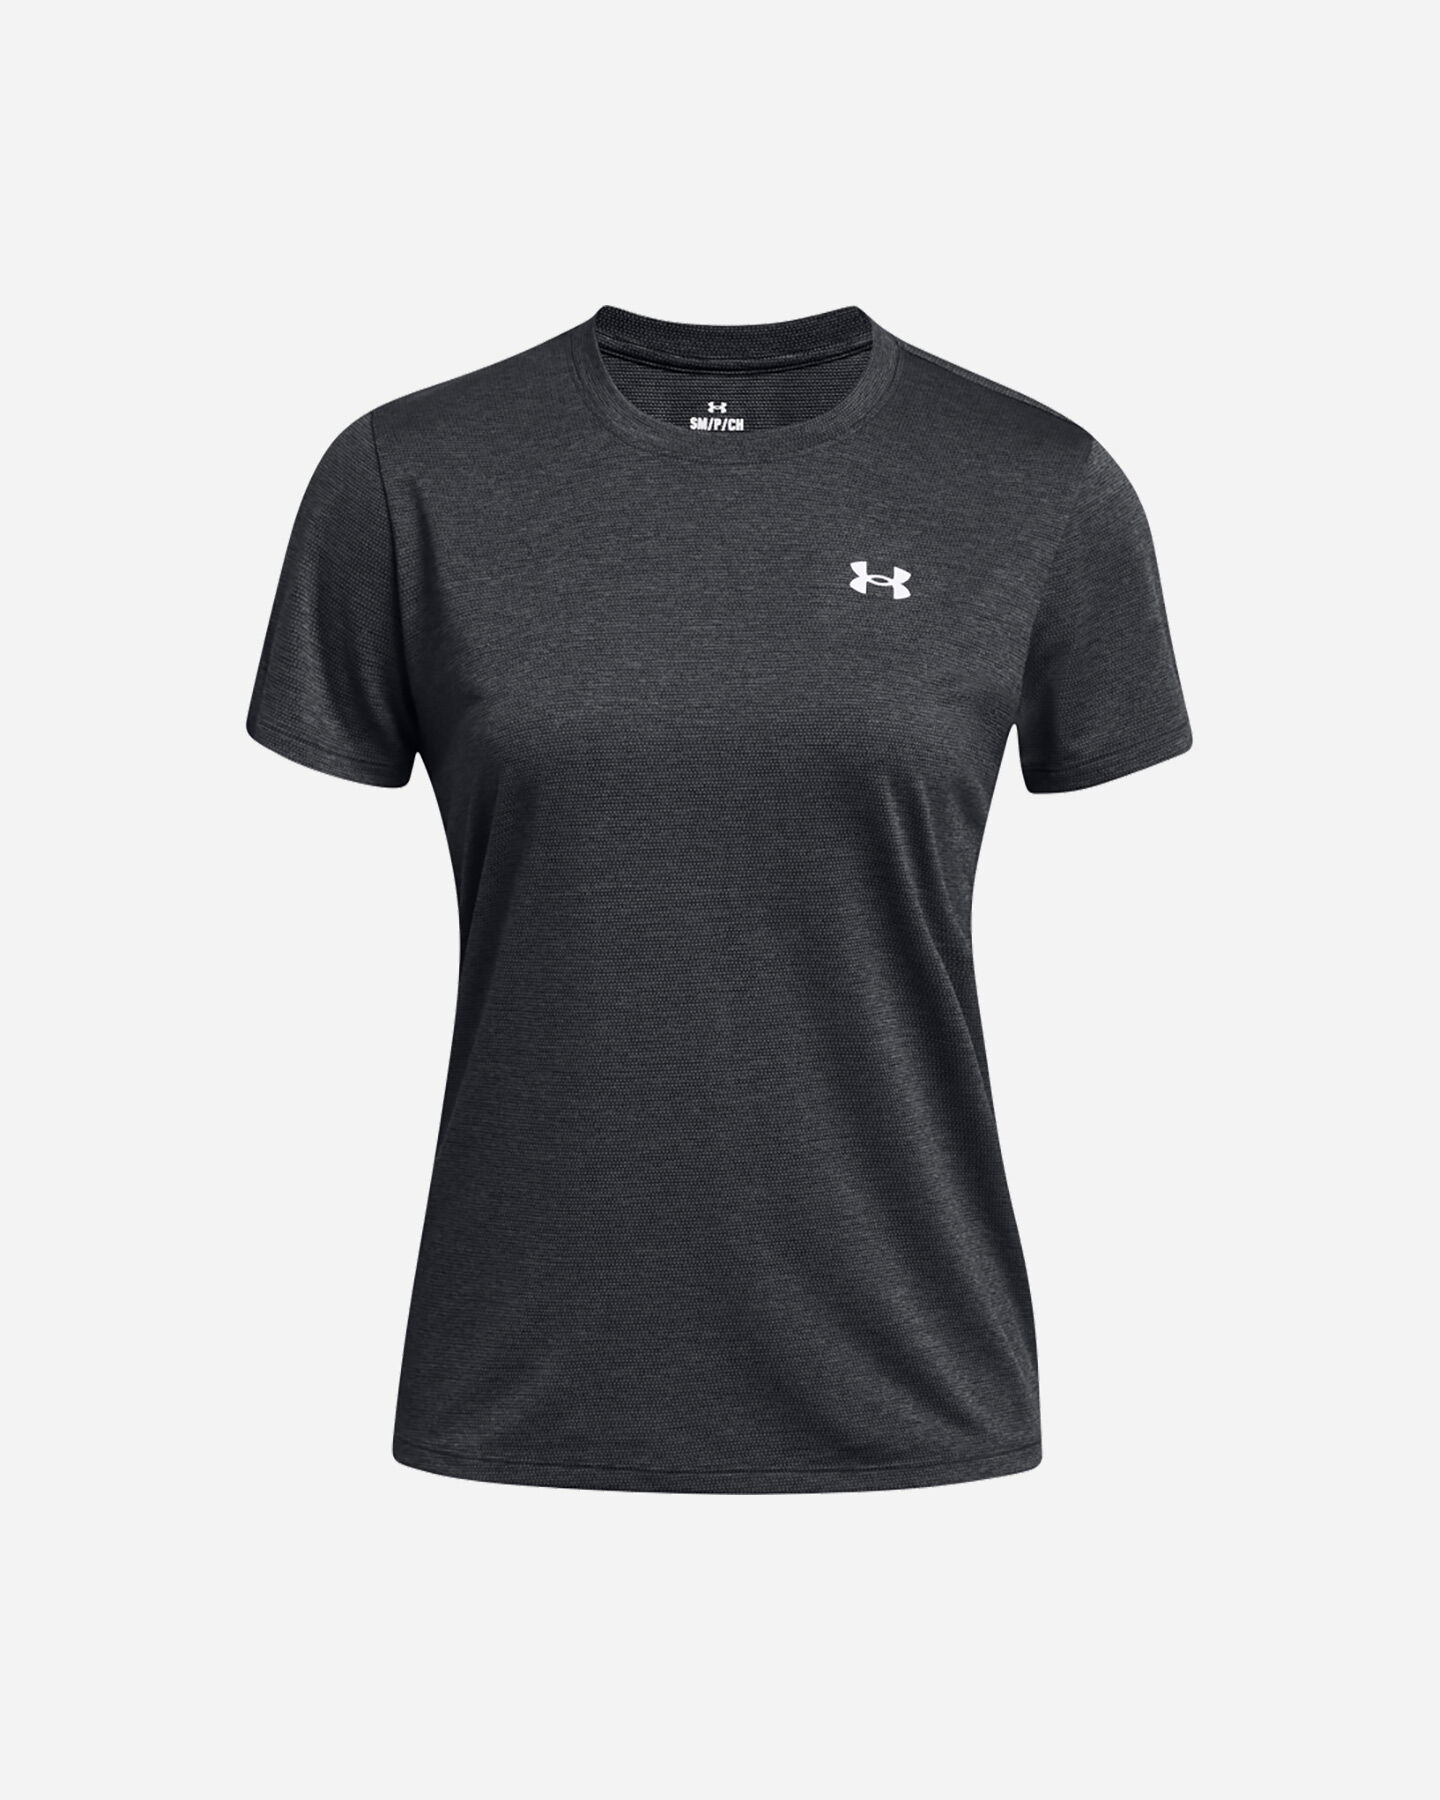  T-Shirt training UNDER ARMOUR TECH BUBBLE W S5642170|0001|XS scatto 0